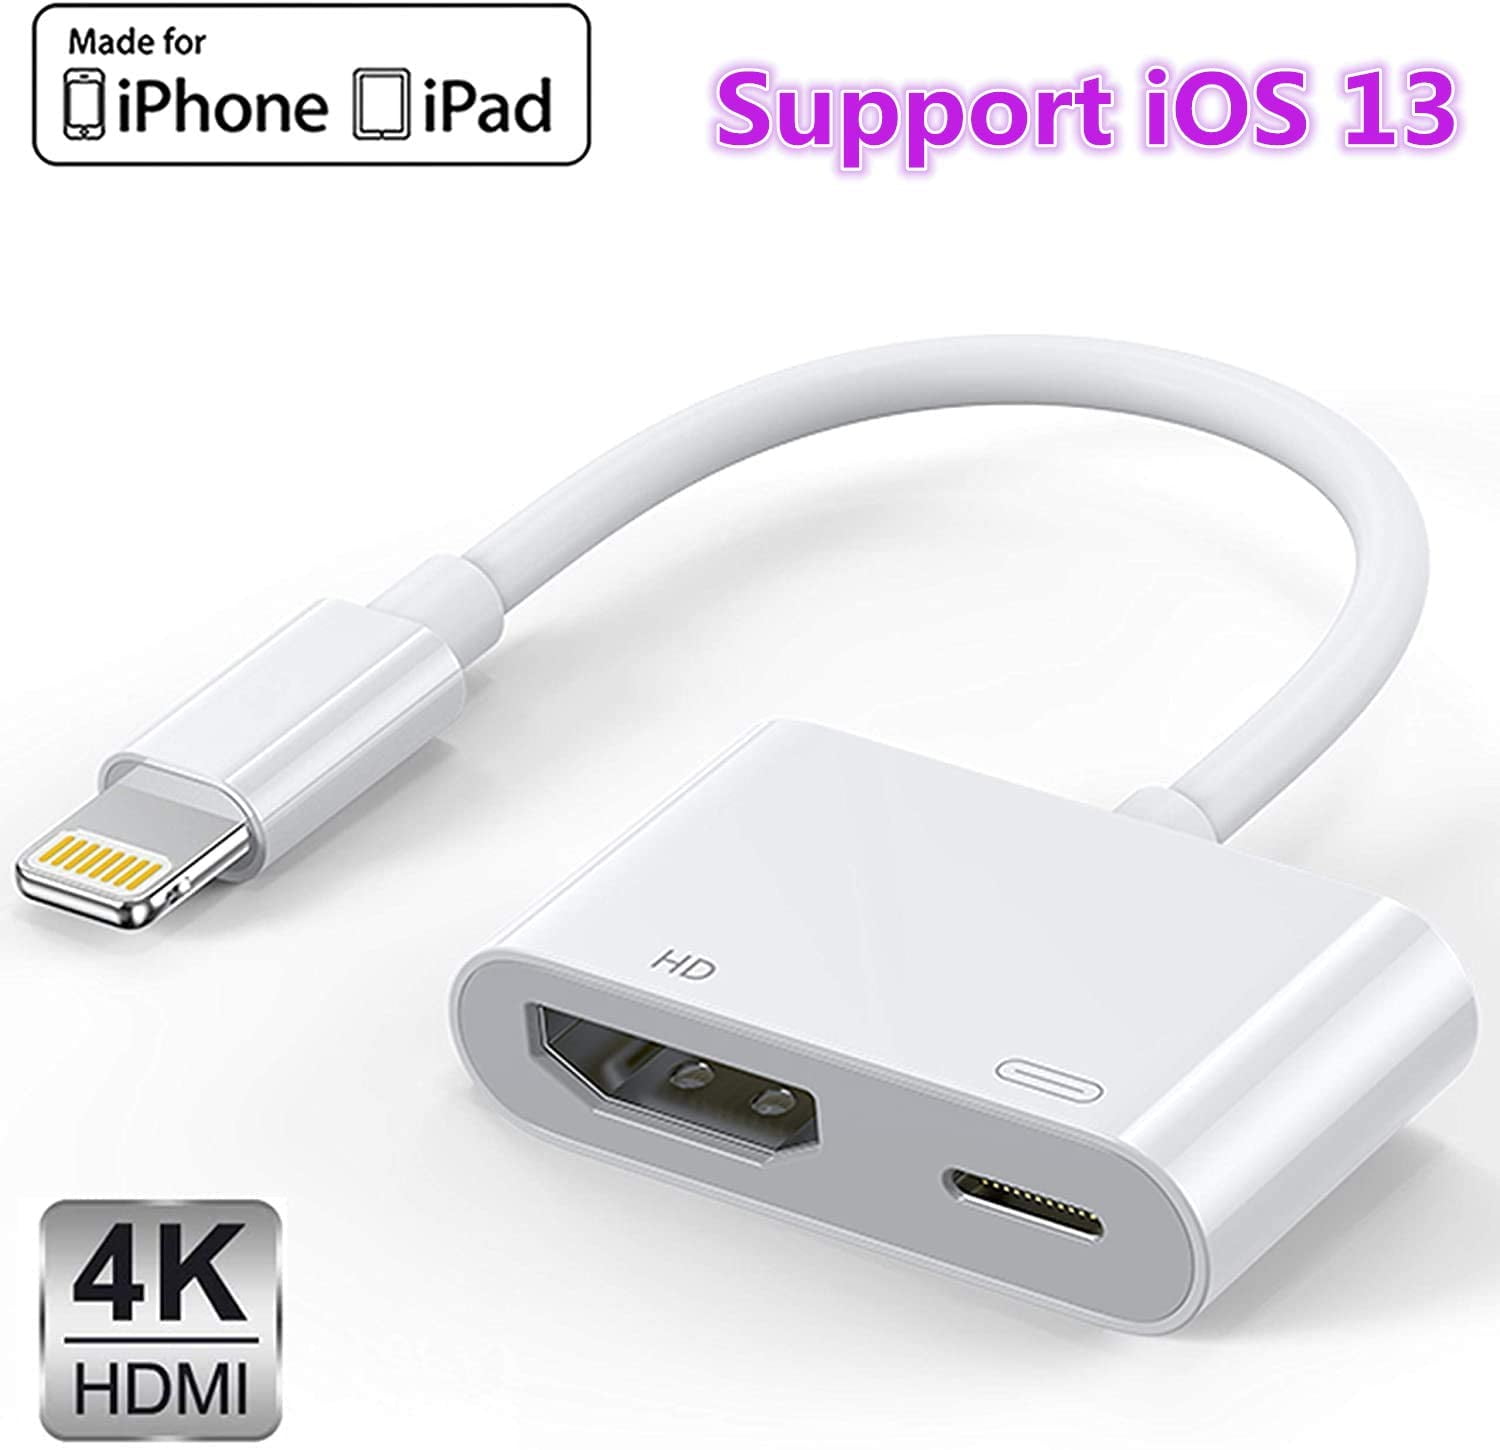 Så hurtigt som en flash elektronisk fangst Lighting to HDMI Adapter Compatible with iPhone iPad, Lighting Digital AV  Adapter 1080p HD TV Connector Cable Compatible with iPhone Xs Max XR X 8 7  iPad to TV Projector Monitor - Walmart.com